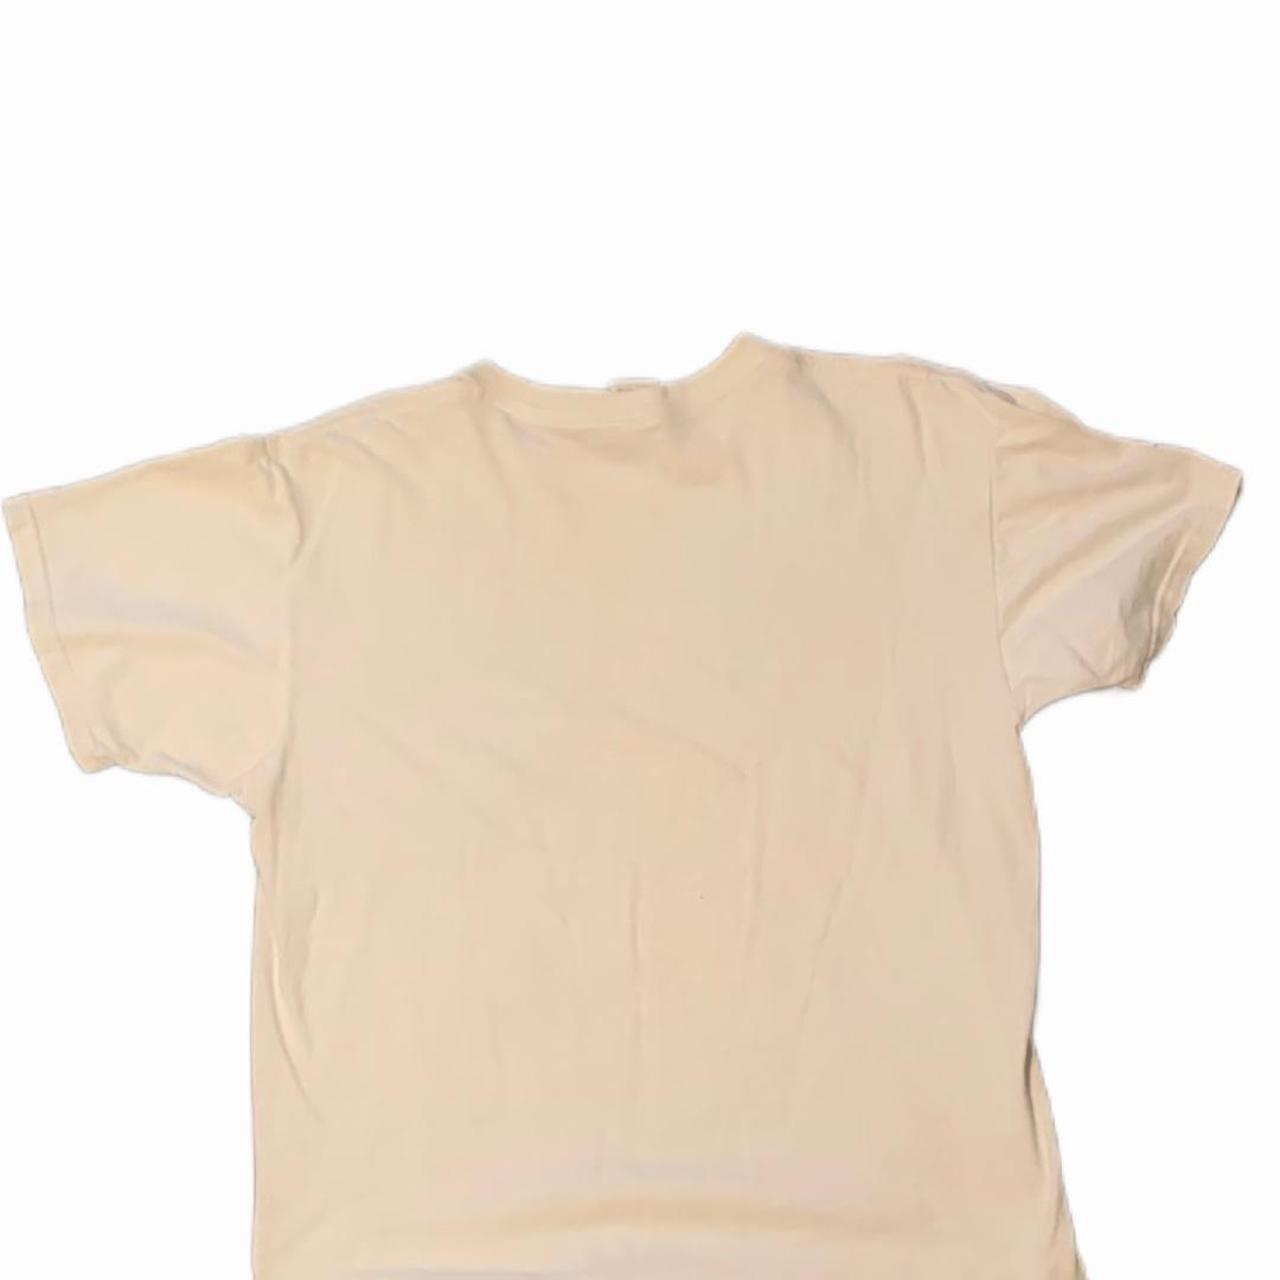 Fit for Me by Fruit of the Loom Men's White and Cream T-shirt (2)